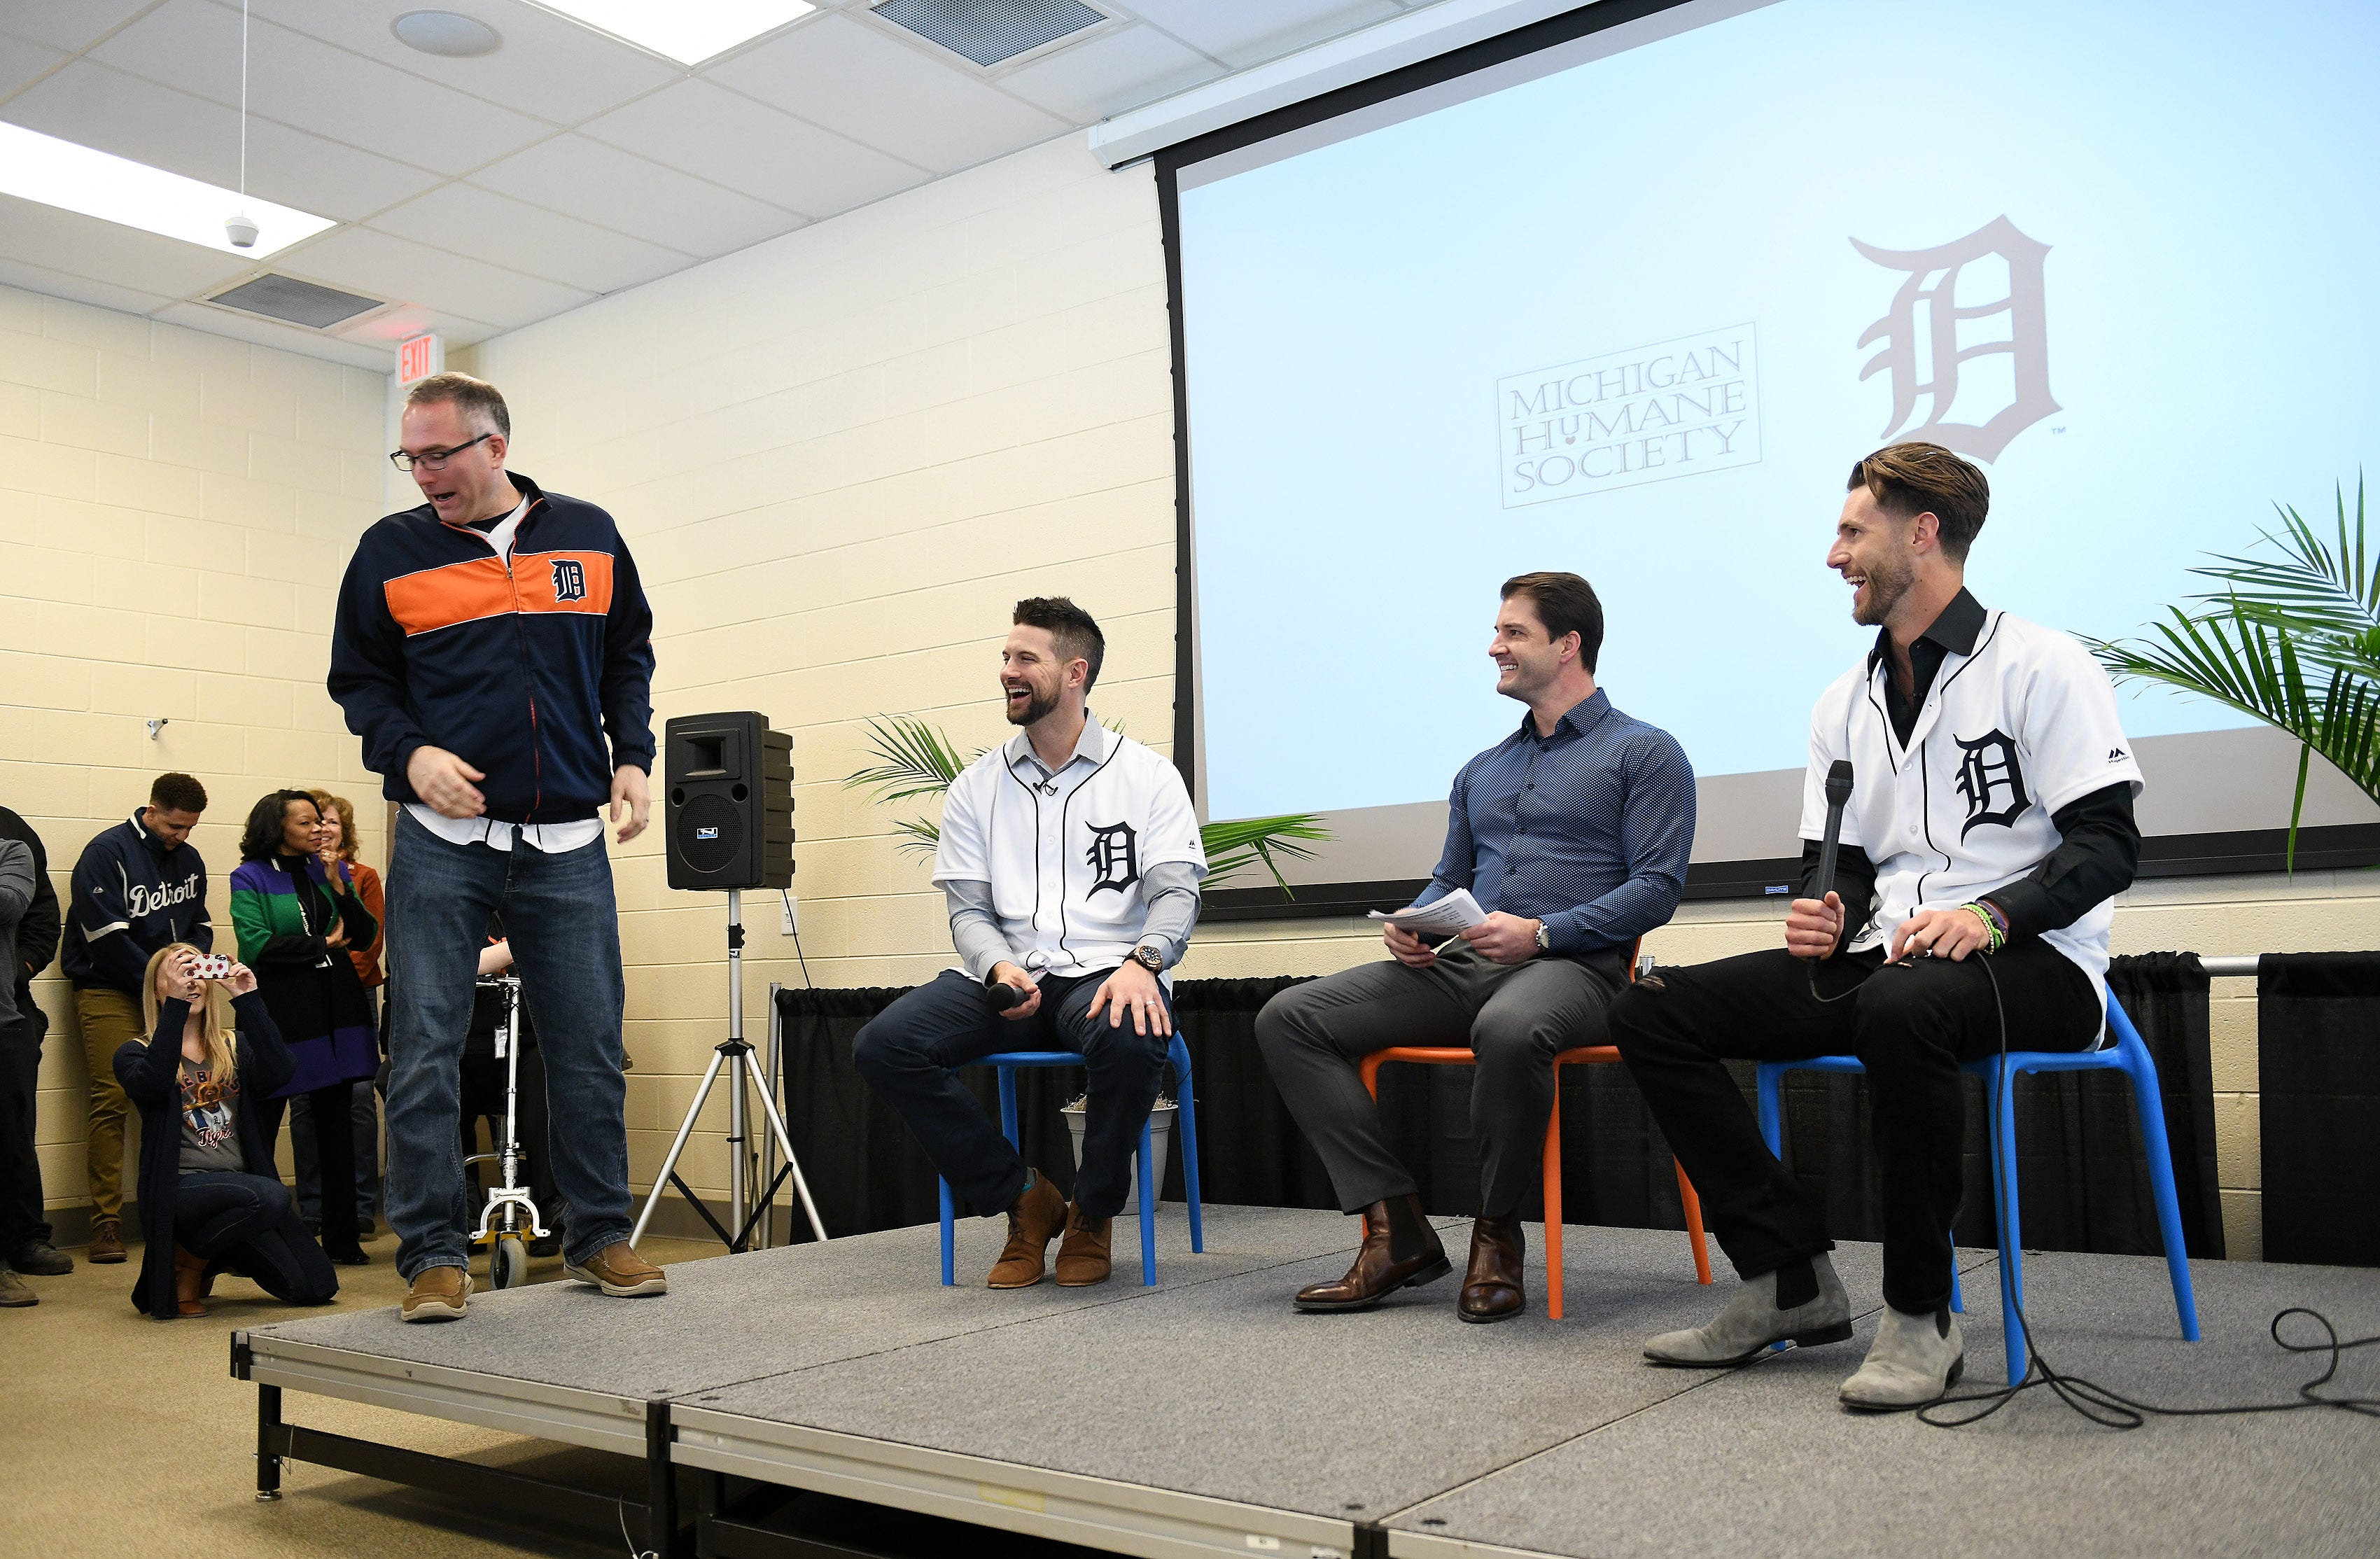 From left, Michigan Humane Society CEO Matt Pepper, Tigers' Jordy Mercer, Johnny Kane from Fox Sports Detroit and Tigers' Shane Greene at the Michigan Humane Society.